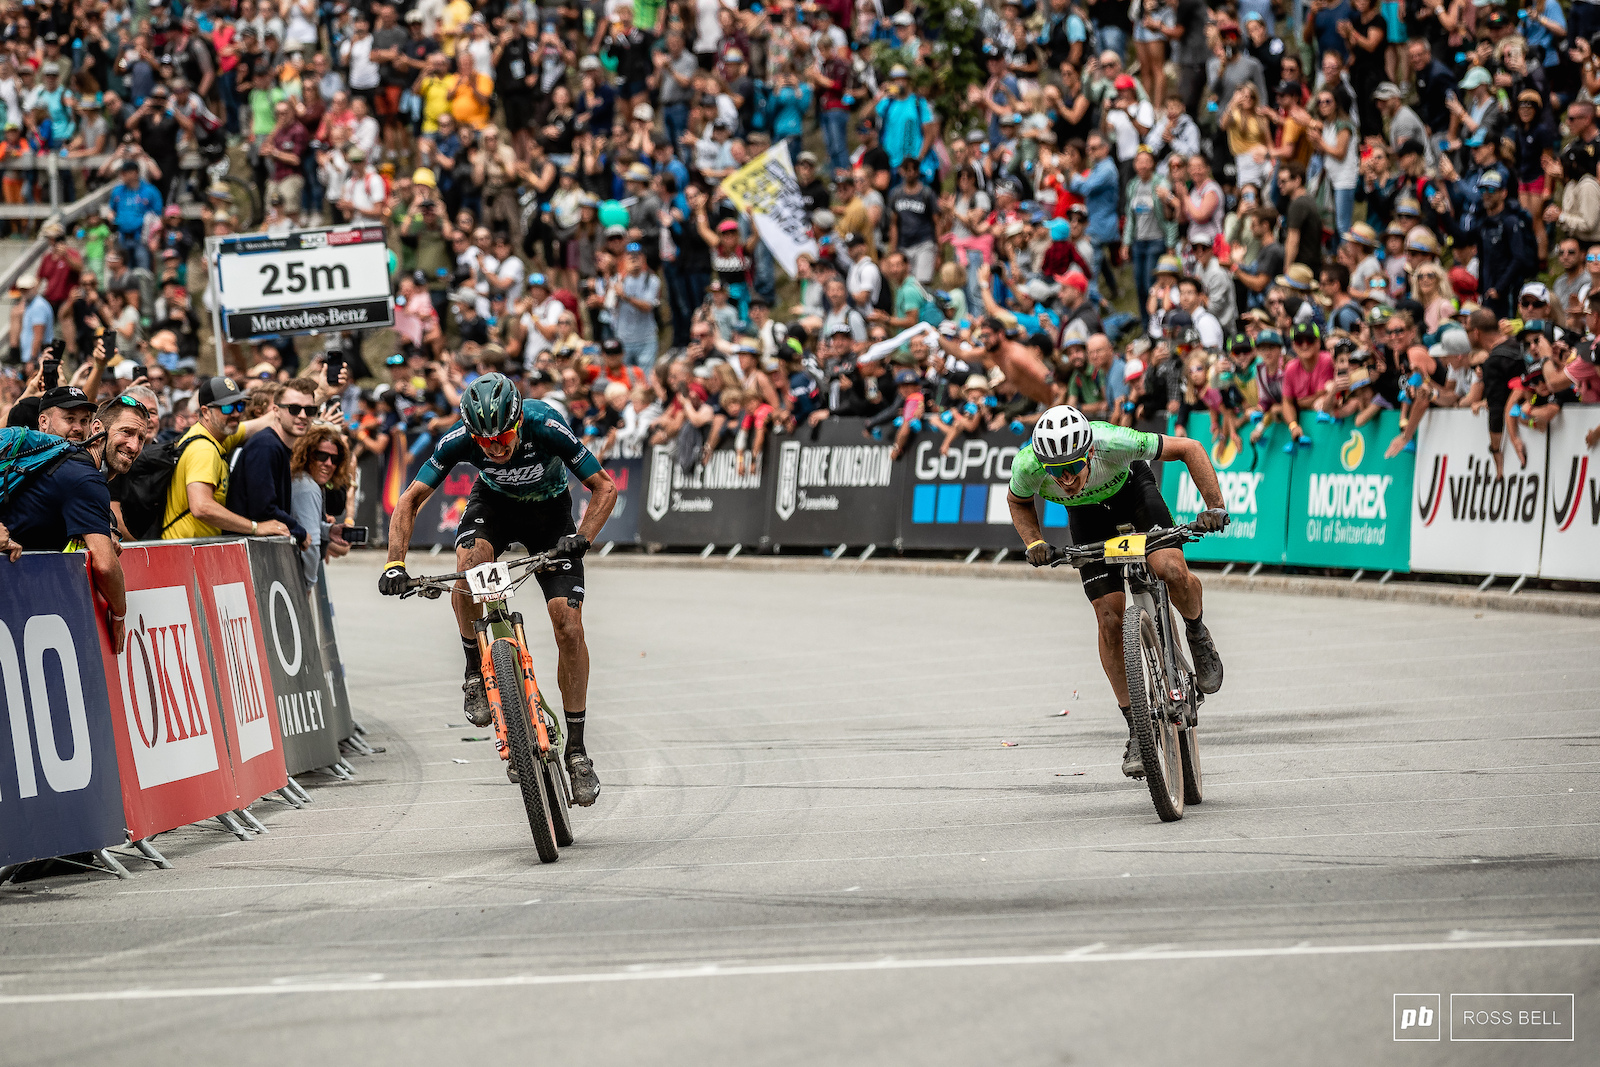 It came down to a somewhat unexpected sprint finish between Luca Bradoit and Alan Hatherly.